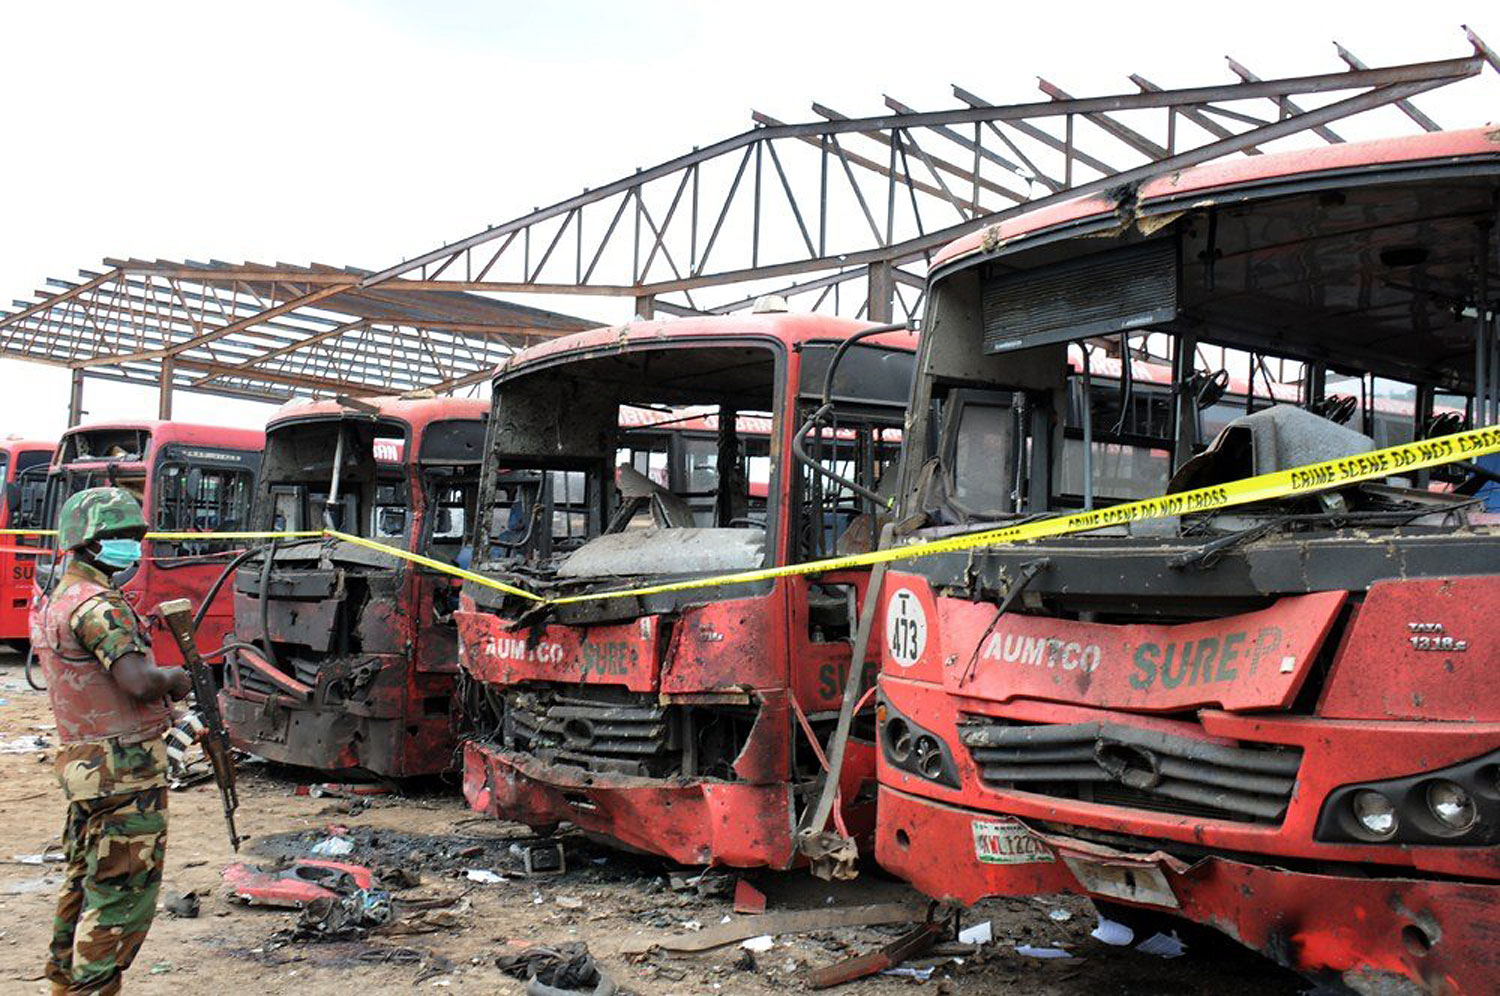 A soldier stands guard in front of burnt buses after an attack in Abuja, on April 14, 2014.